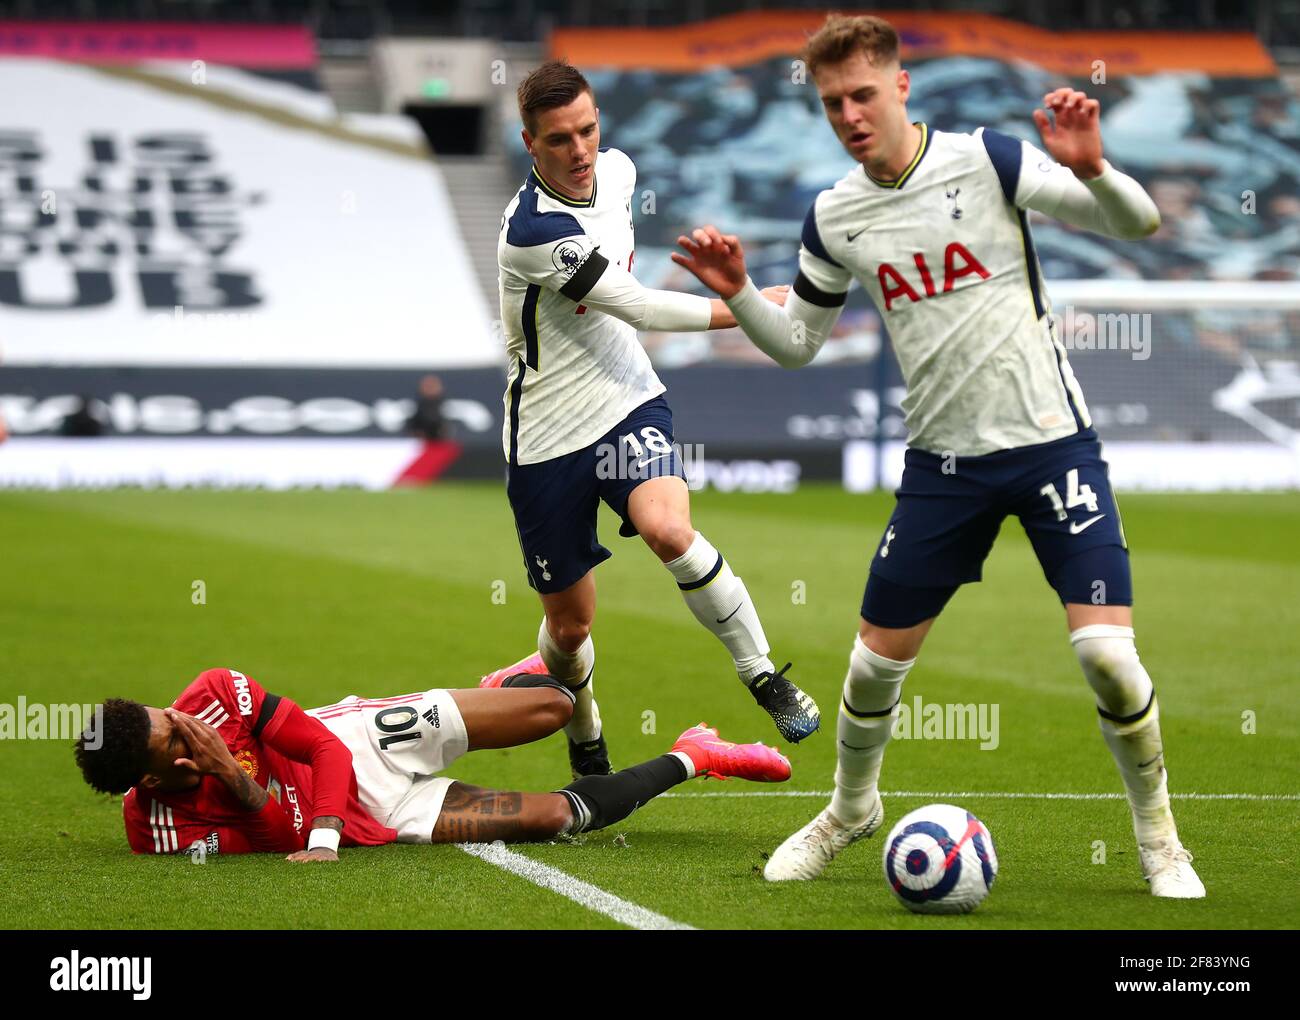 Tottenham Hotspur's Giovani Lo Celso (centre) tackles Manchester United's Marcus Rashford (left) during the Premier League match at the Tottenham Hotspur Stadium, London. Picture date: Sunday April 11, 2021. Stock Photo